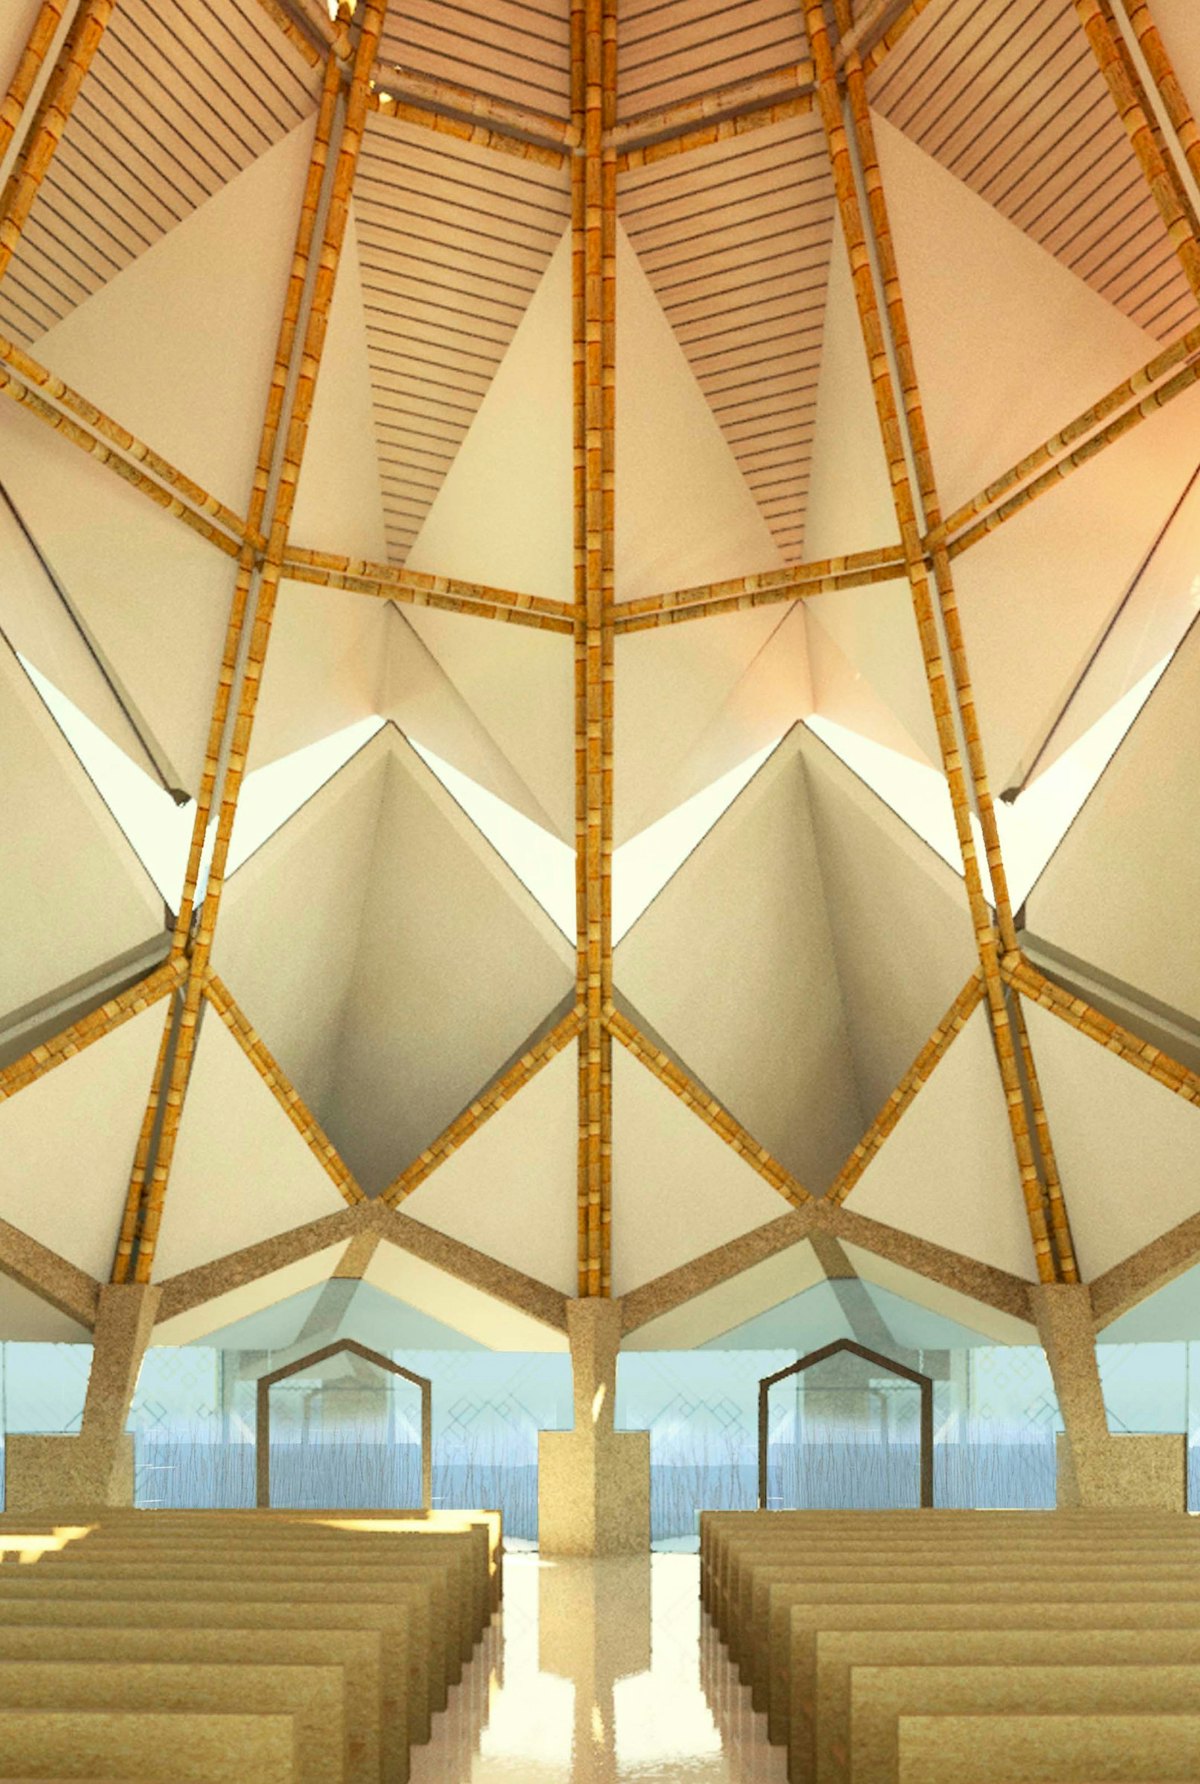 An image of the design for the interior of the central edifice.